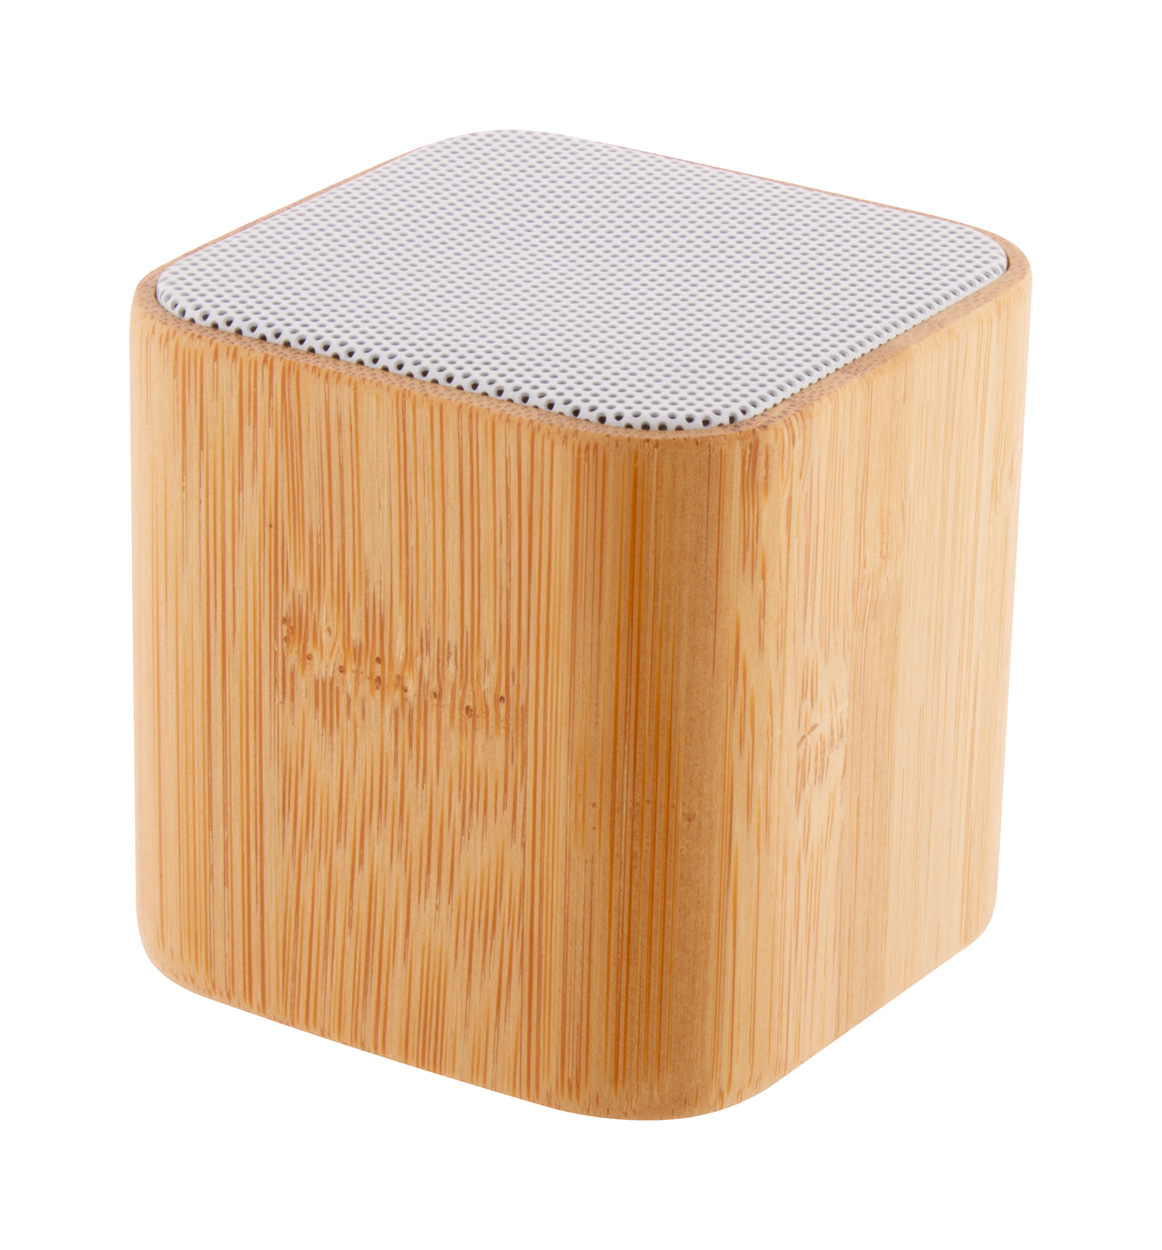 Wireless speaker CUBOO with bamboo surface - natural